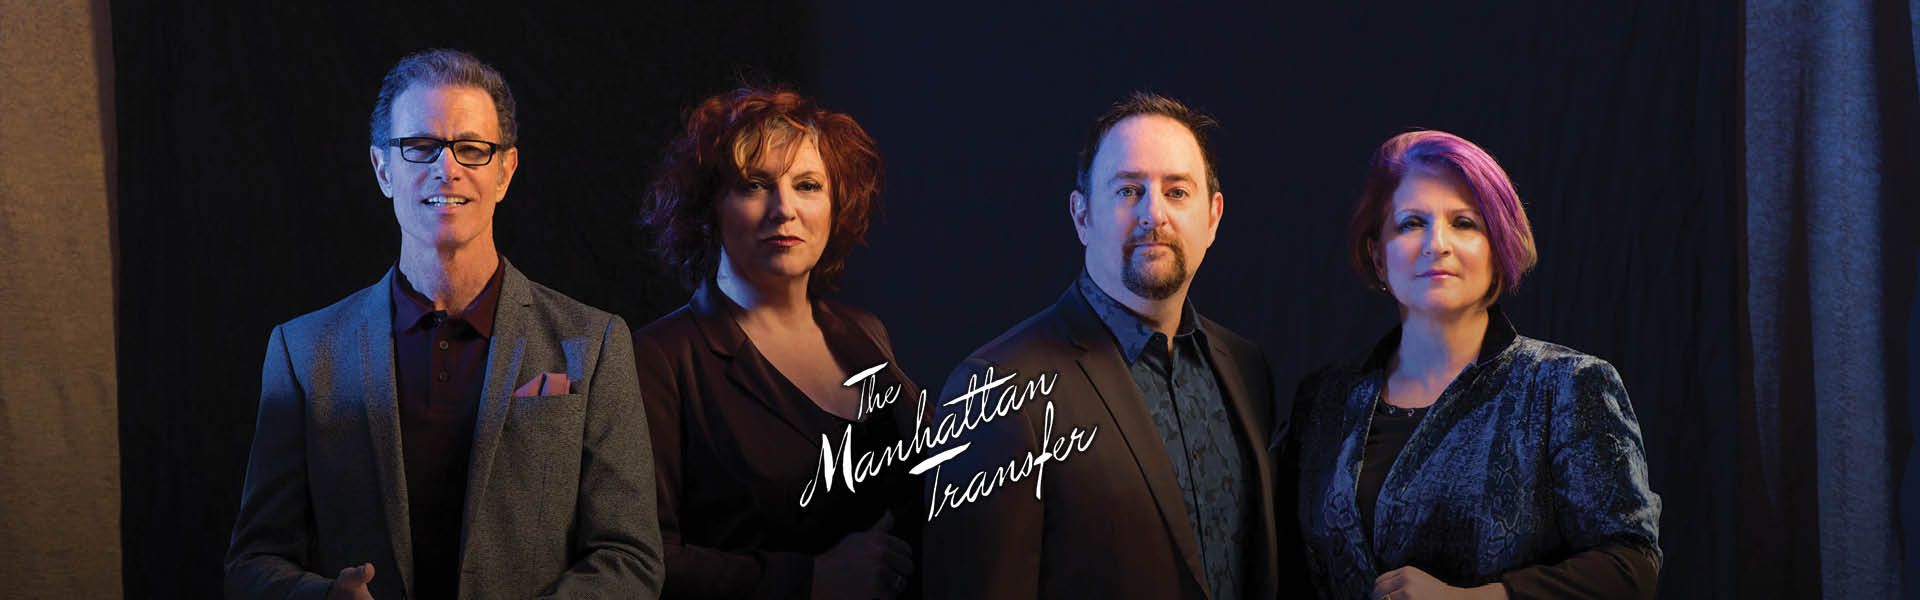 Picture of music group The Manhattan Transfer